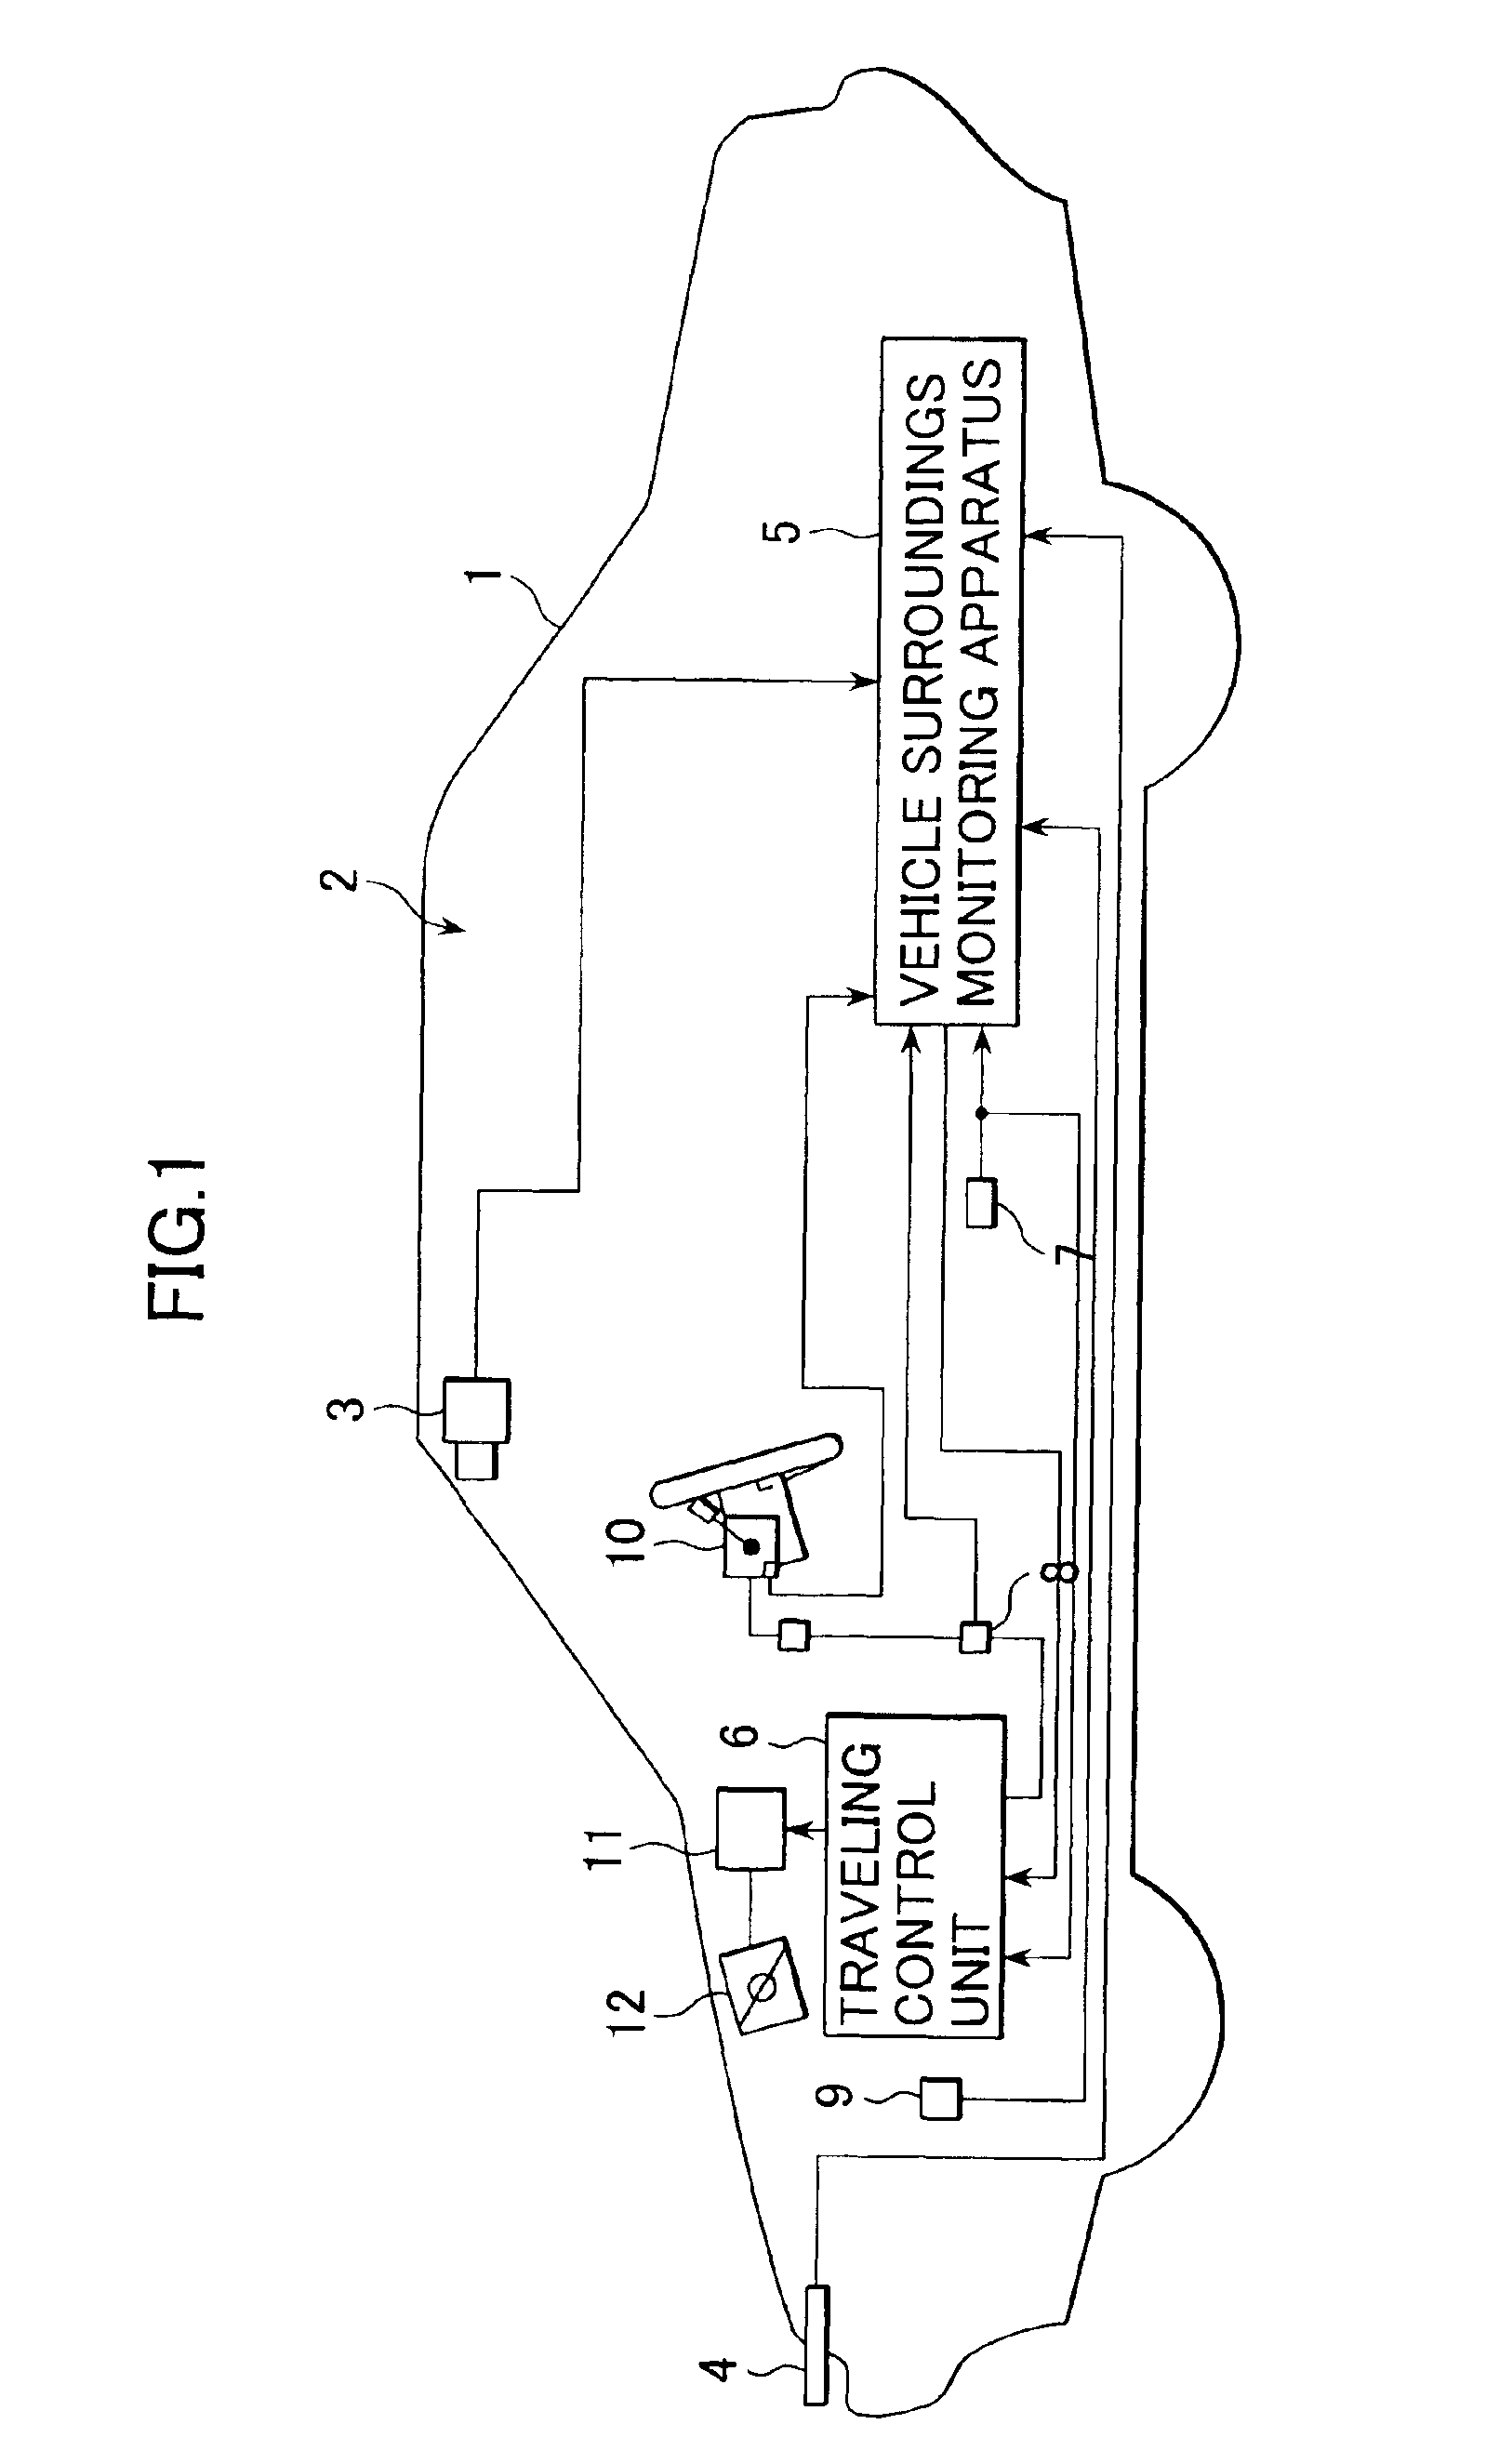 Vehicle surroundings monitoring apparatus and traveling control system incorporating the apparatus